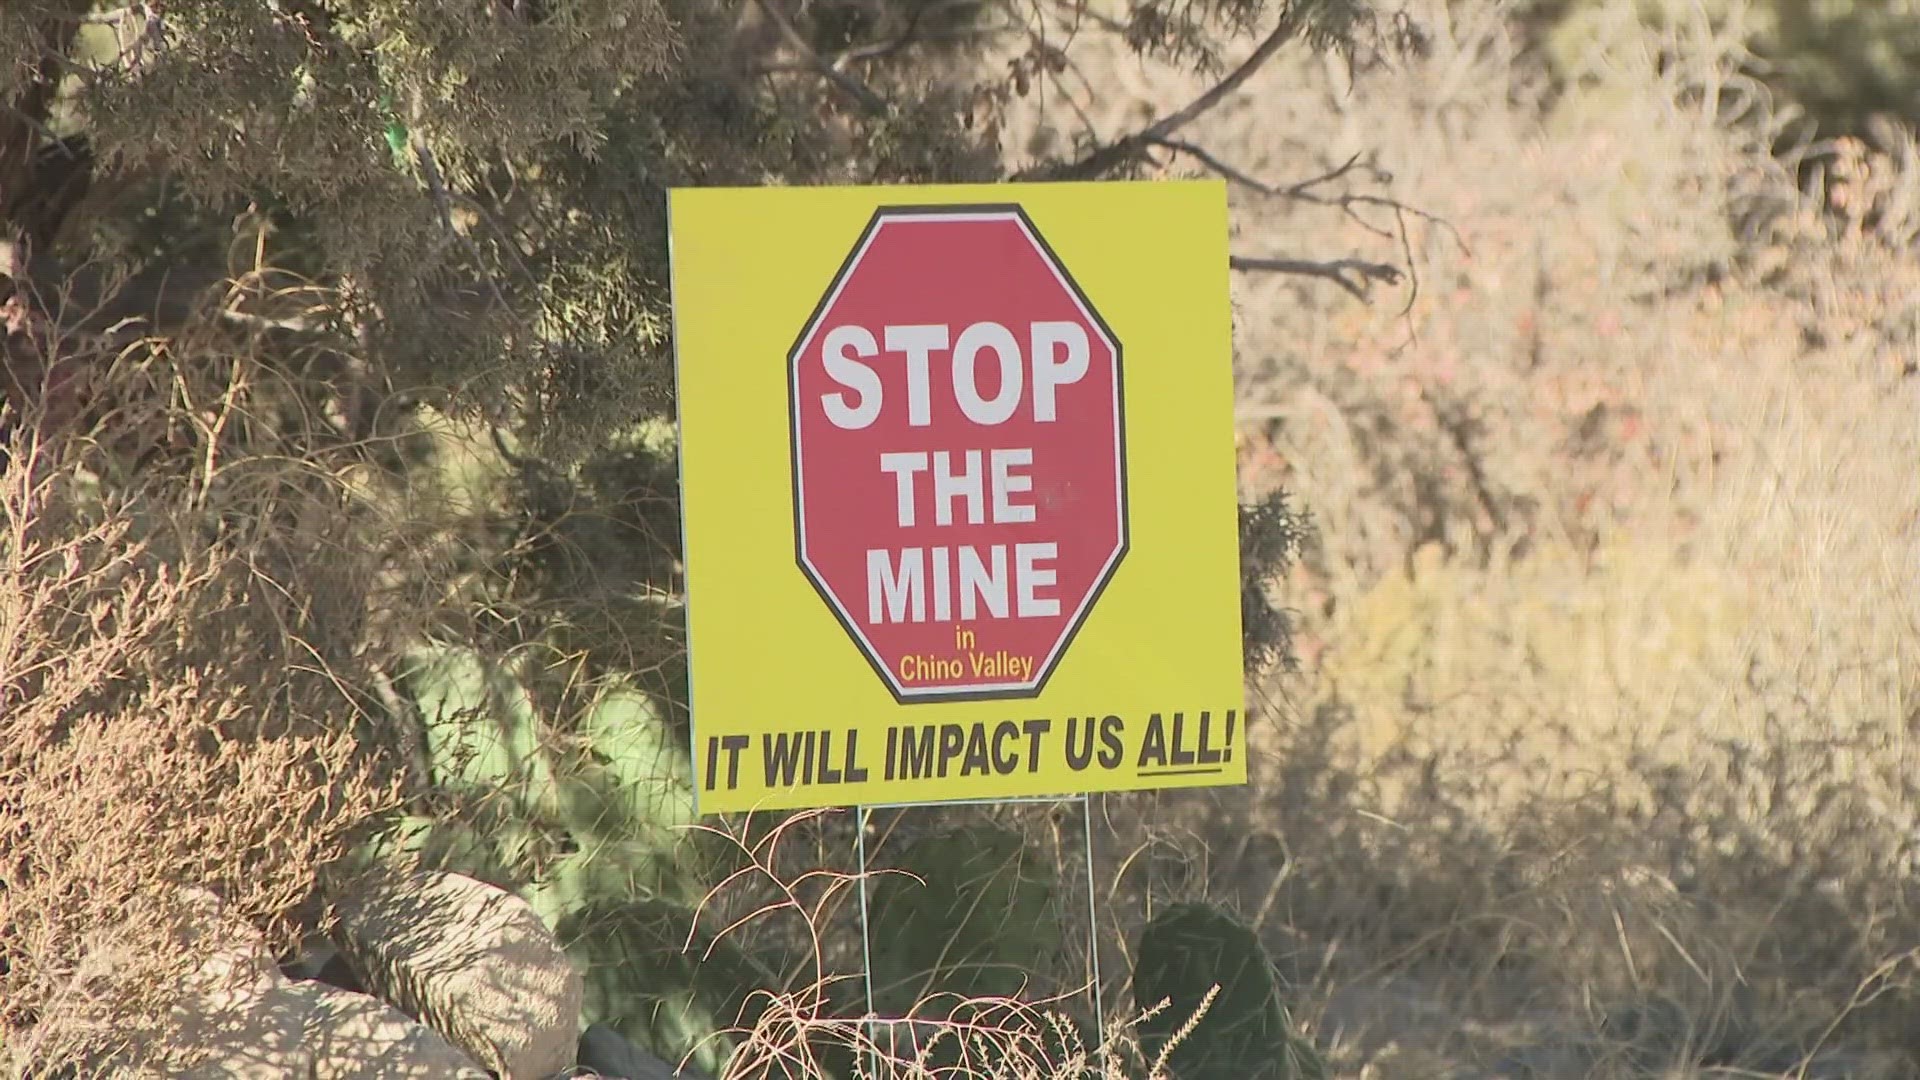 Attorney General Kris Mayes filed a complaint in the Maricopa County Superior Court alleging the proposed mine in Chino Valley violates Arizona law.